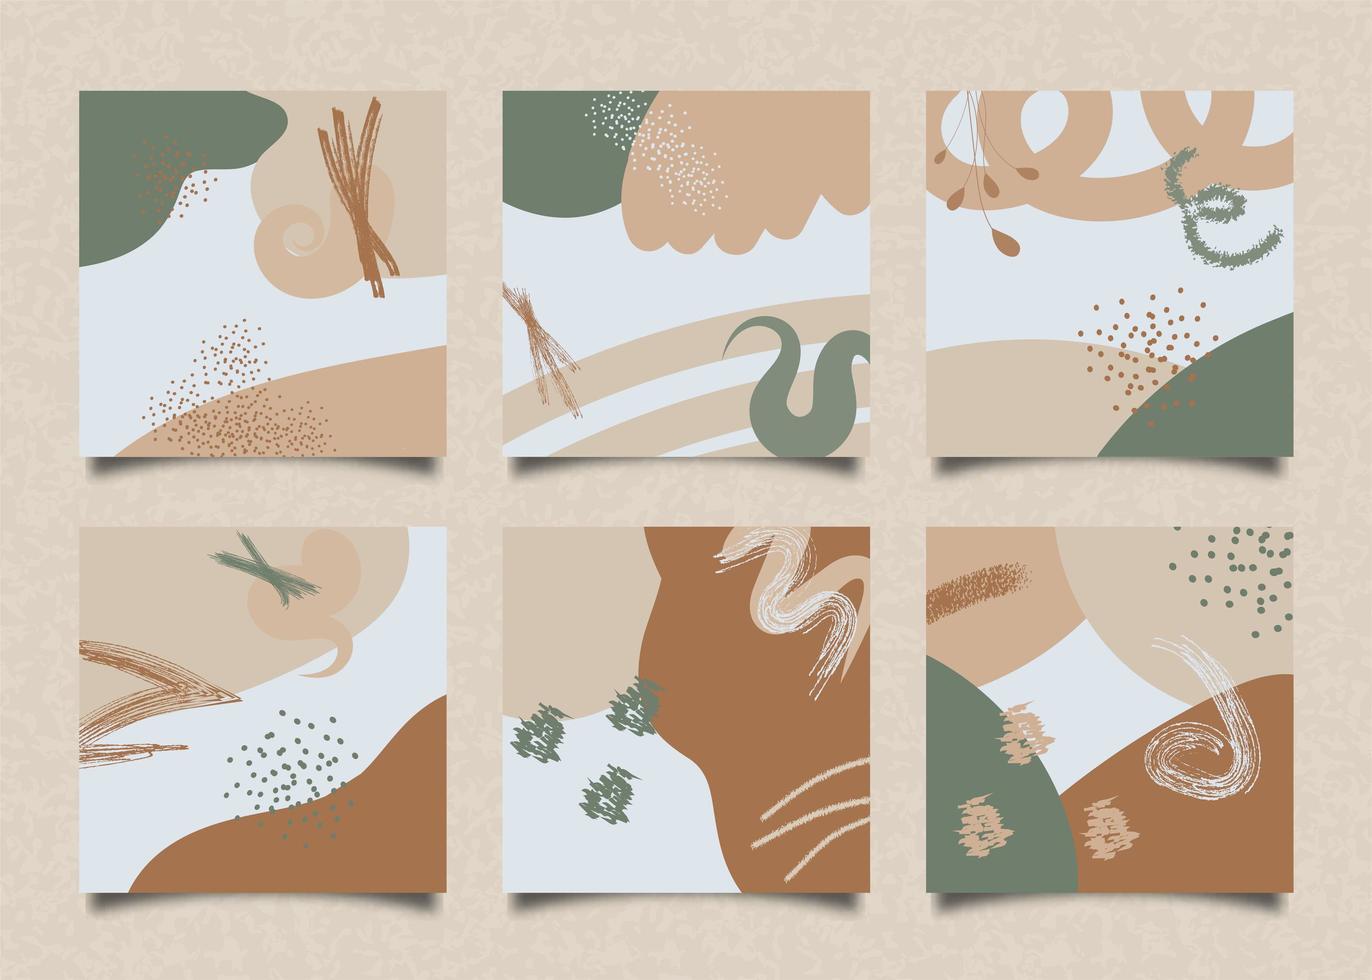 Square Cards with Trendy Abstract Shapes in Earth Tones vector